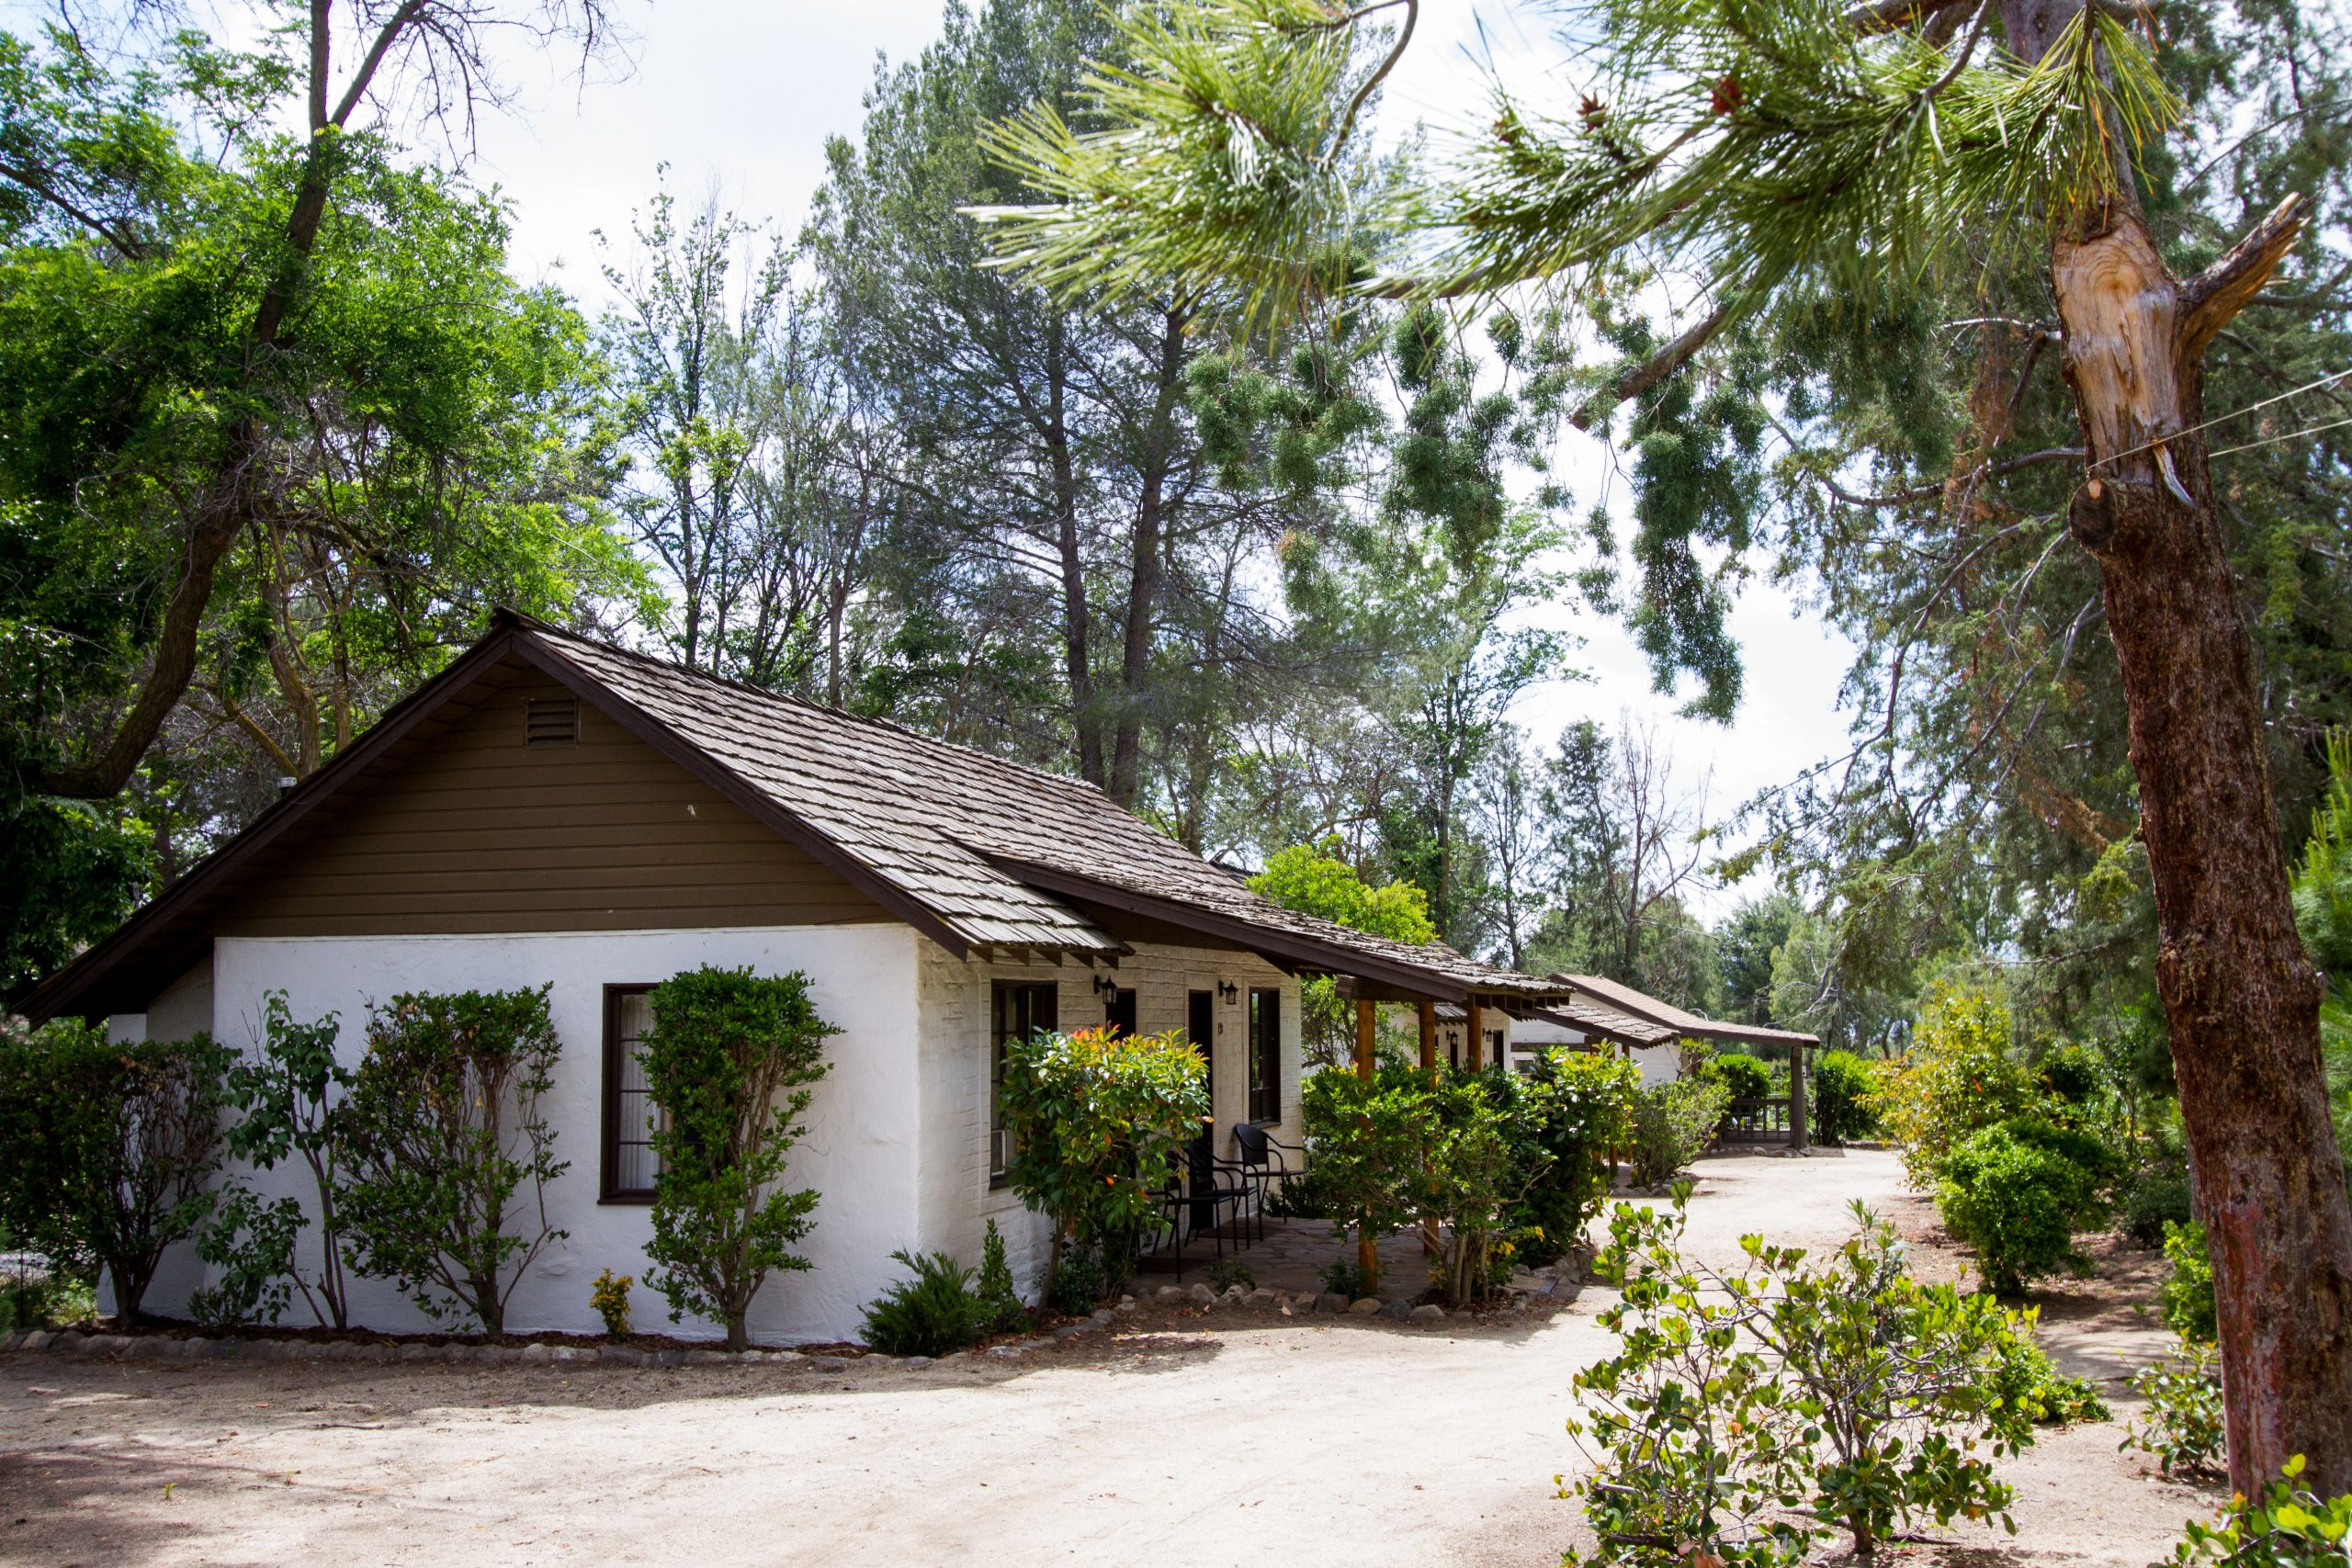 Travel into San Diego's past by staying in a renovated historic cottage in Warner Springs.